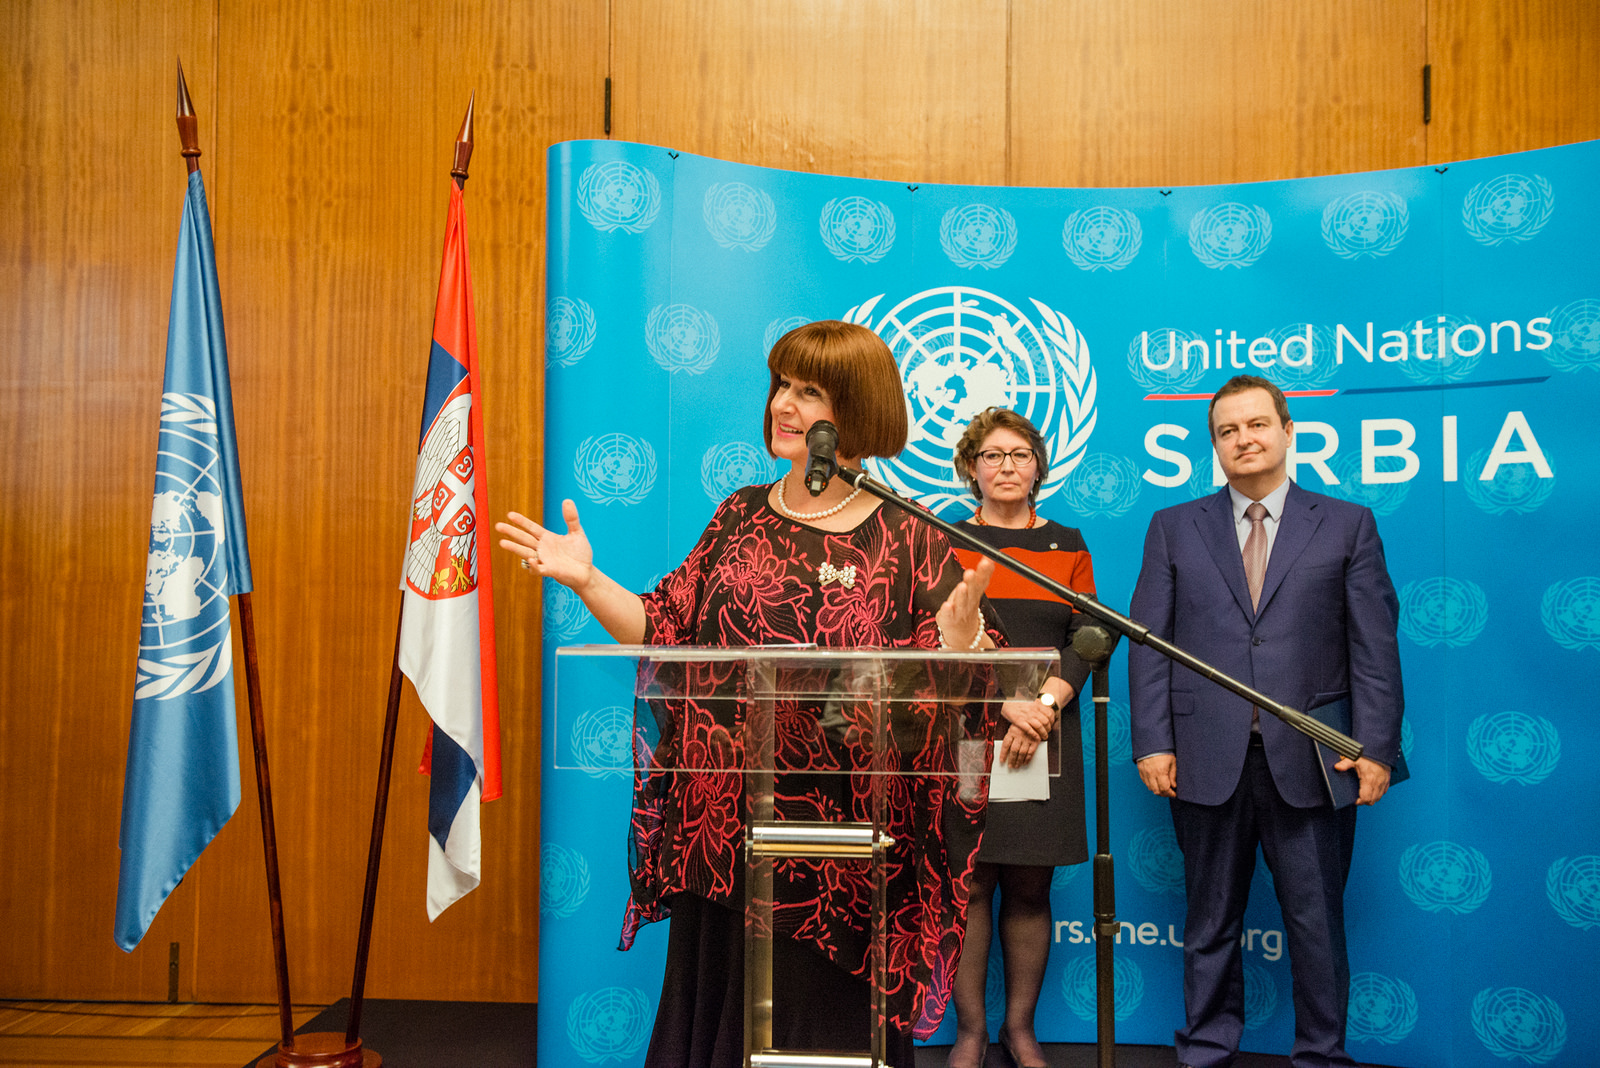 Marking of the 71st Anniversary of the UN - Serbia